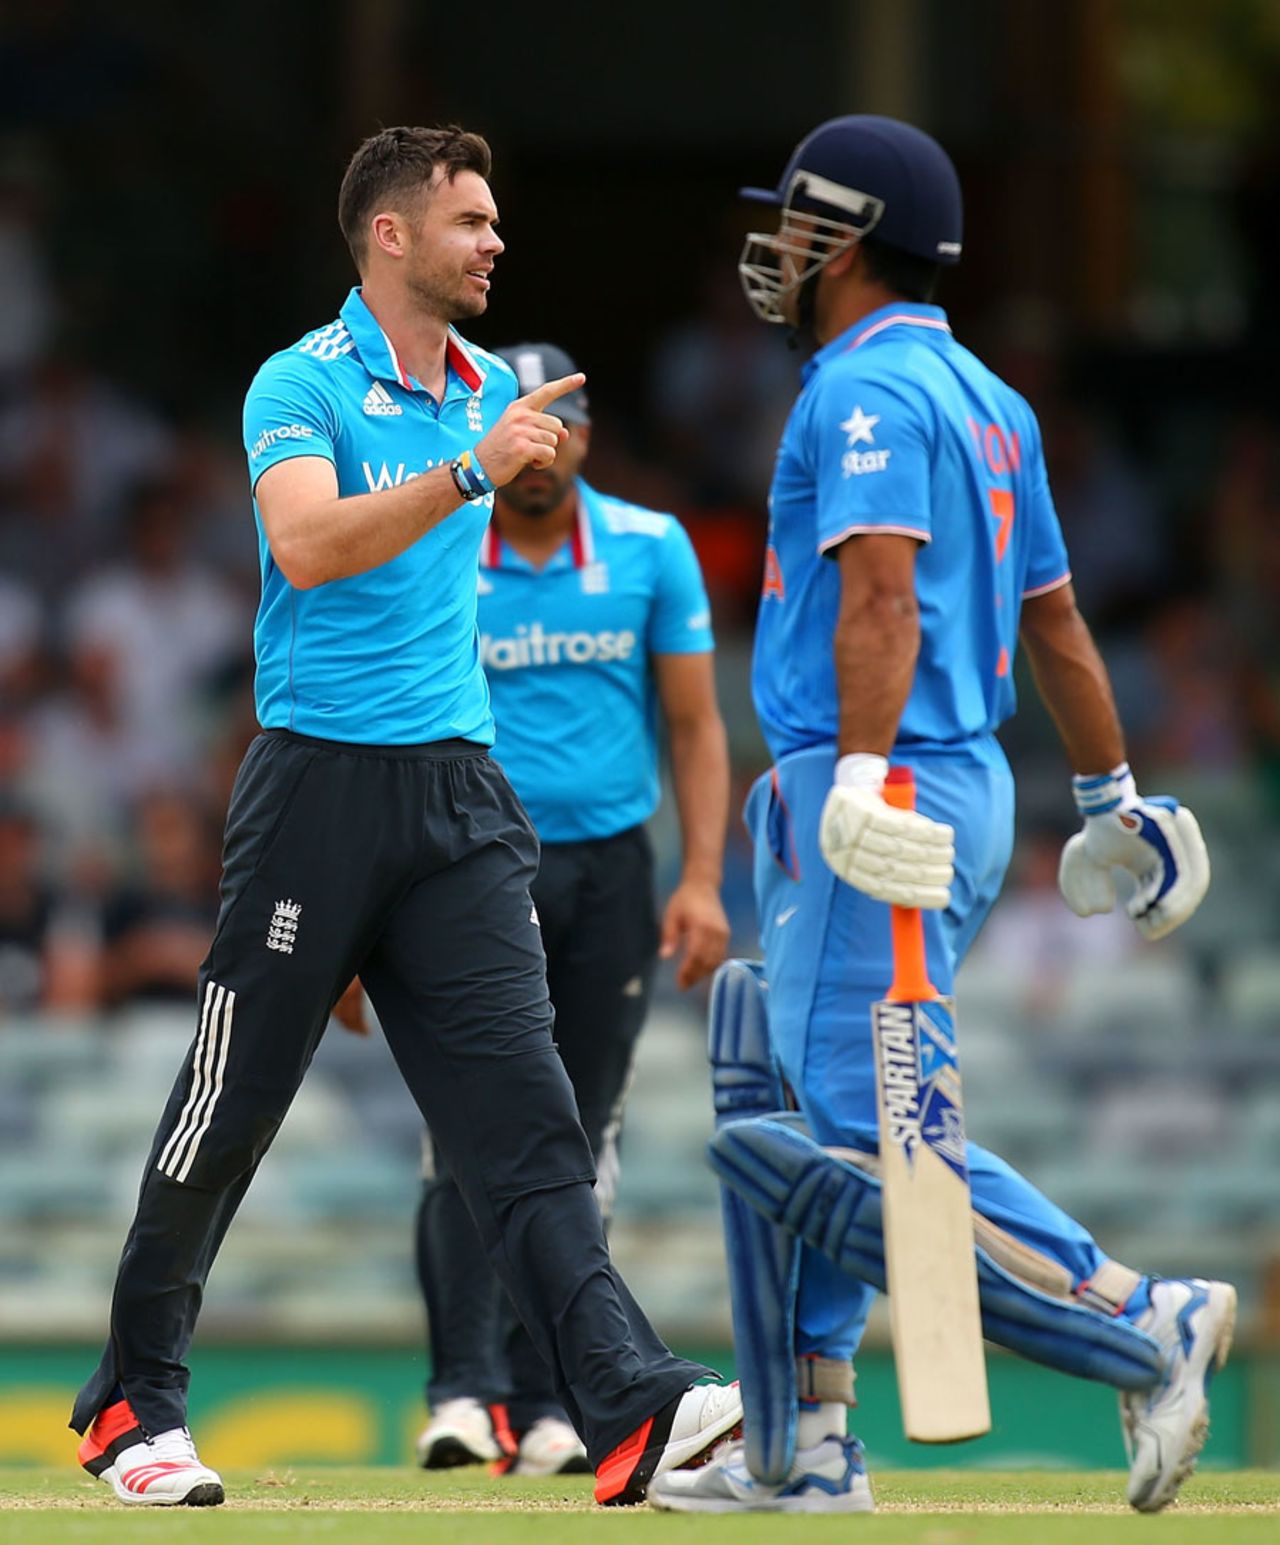 James Anderson trapped MS Dhoni lbw for 17, England v India, Carlton Mid Tri-series, Perth, January 30, 2015